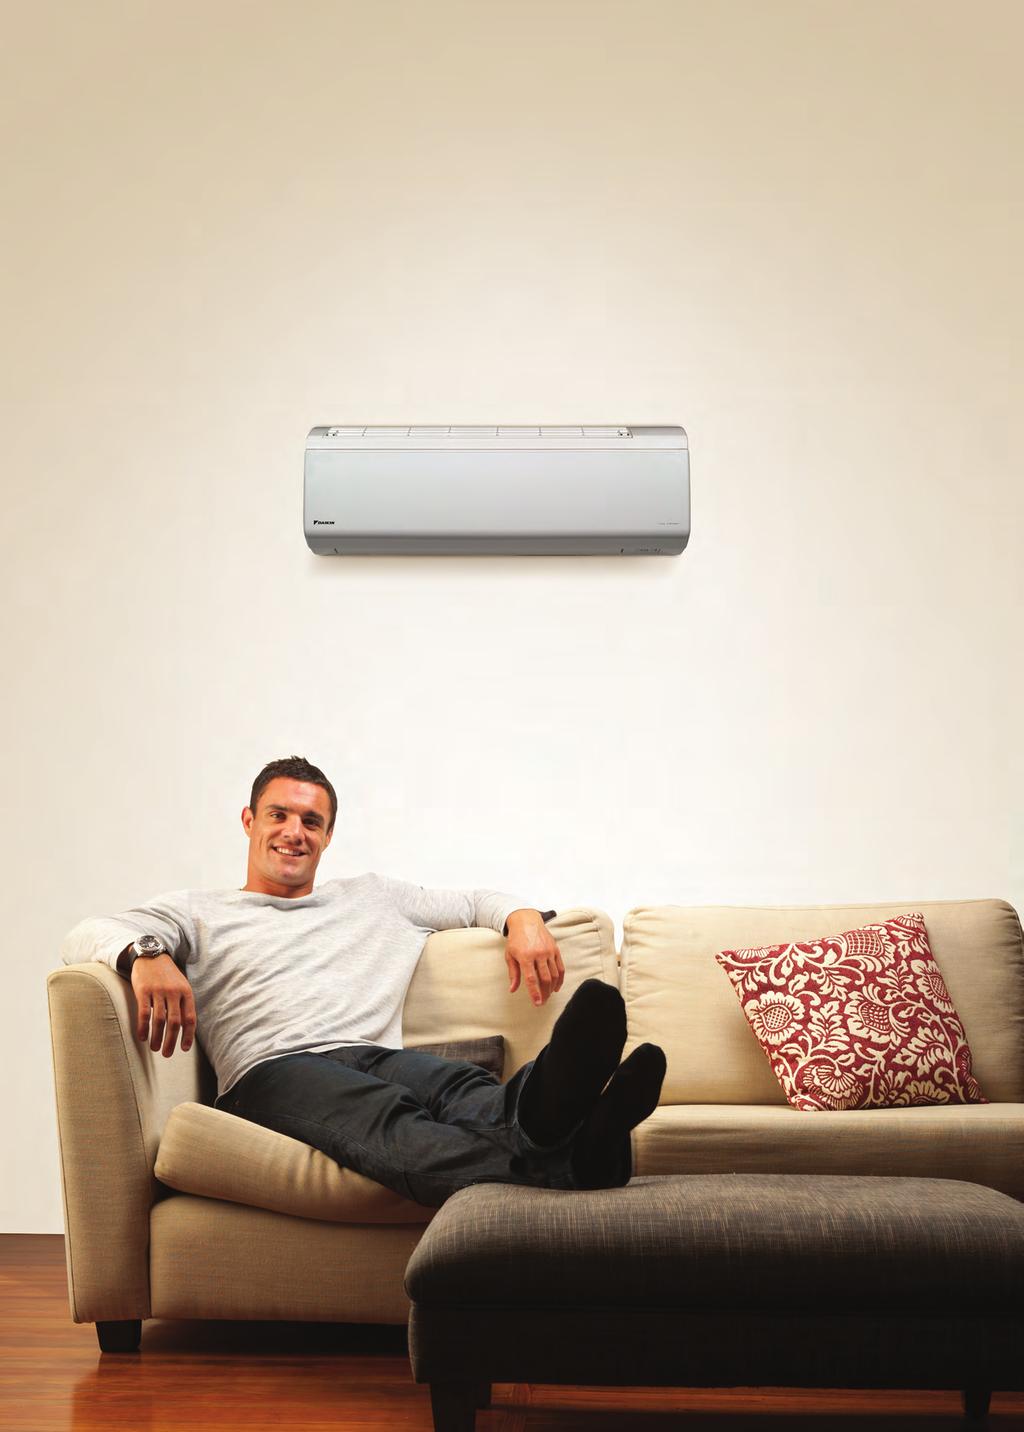 HEAT PUMPS BY DAIKIN Energy efficient heating and cooling